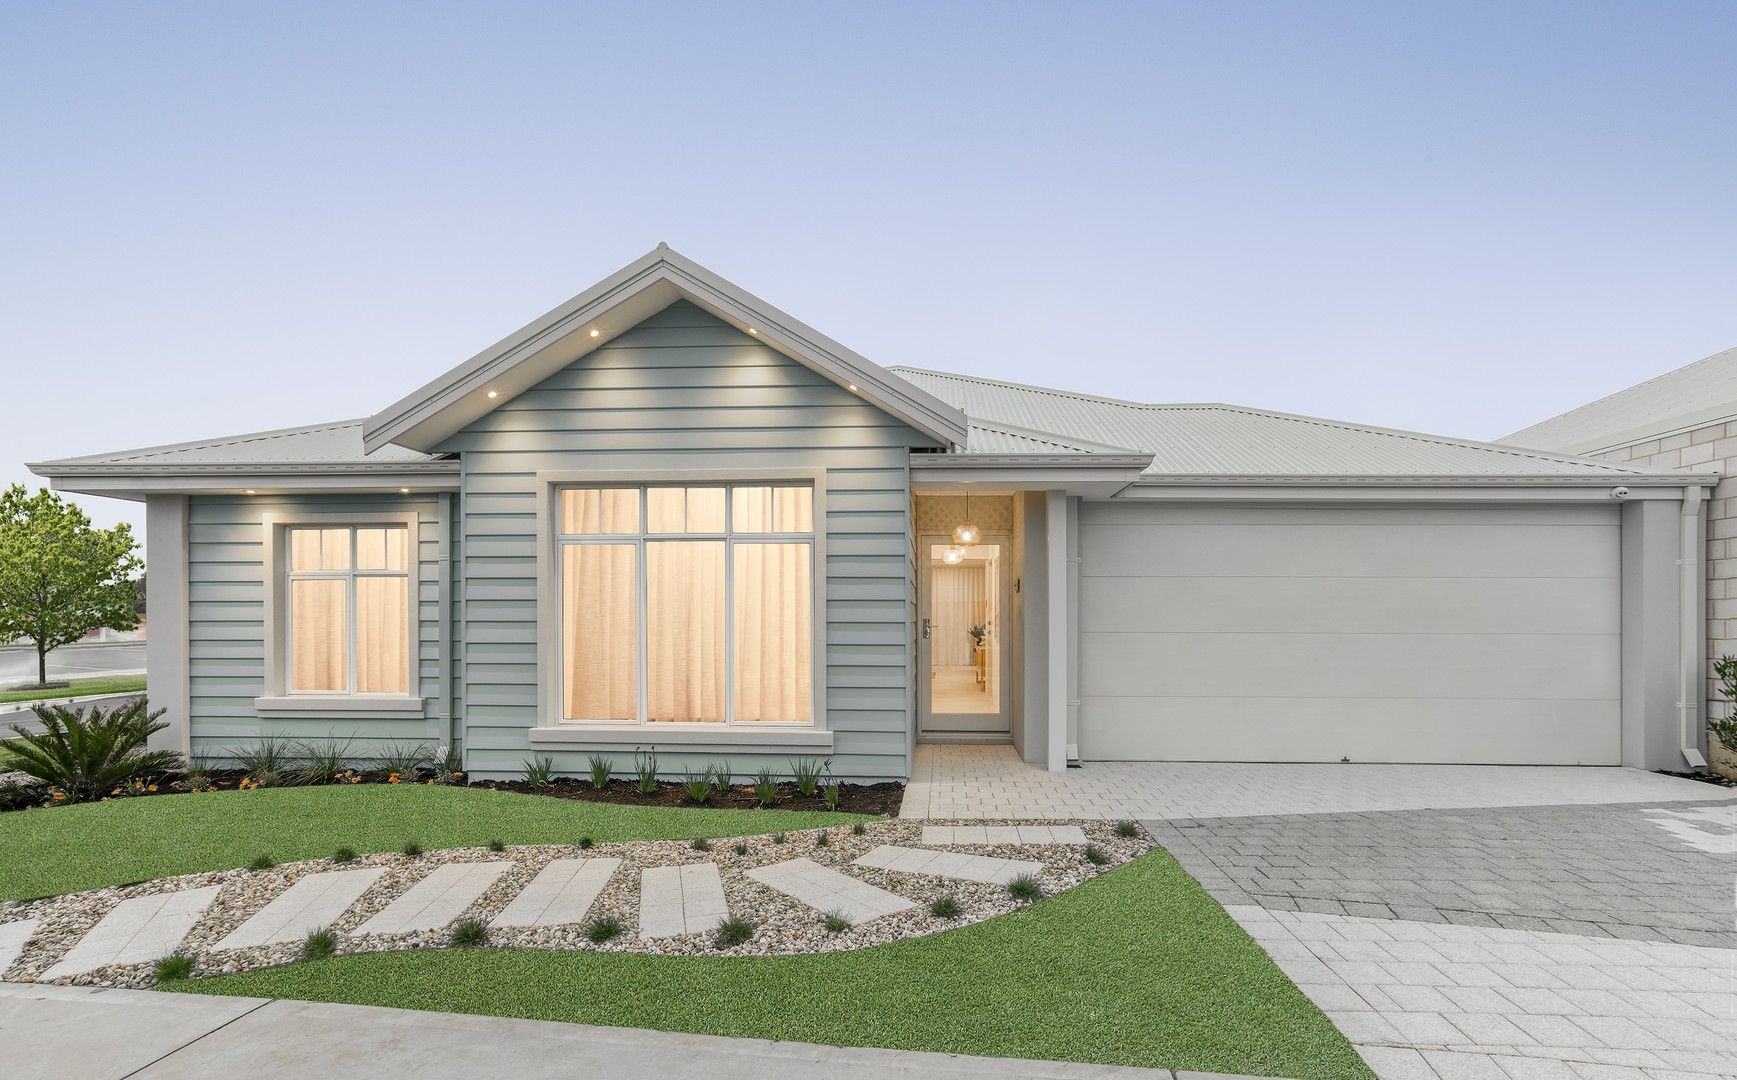 4 bedrooms New House & Land in Lot 160 Indigo Road SOUTH YUNDERUP WA, 6208